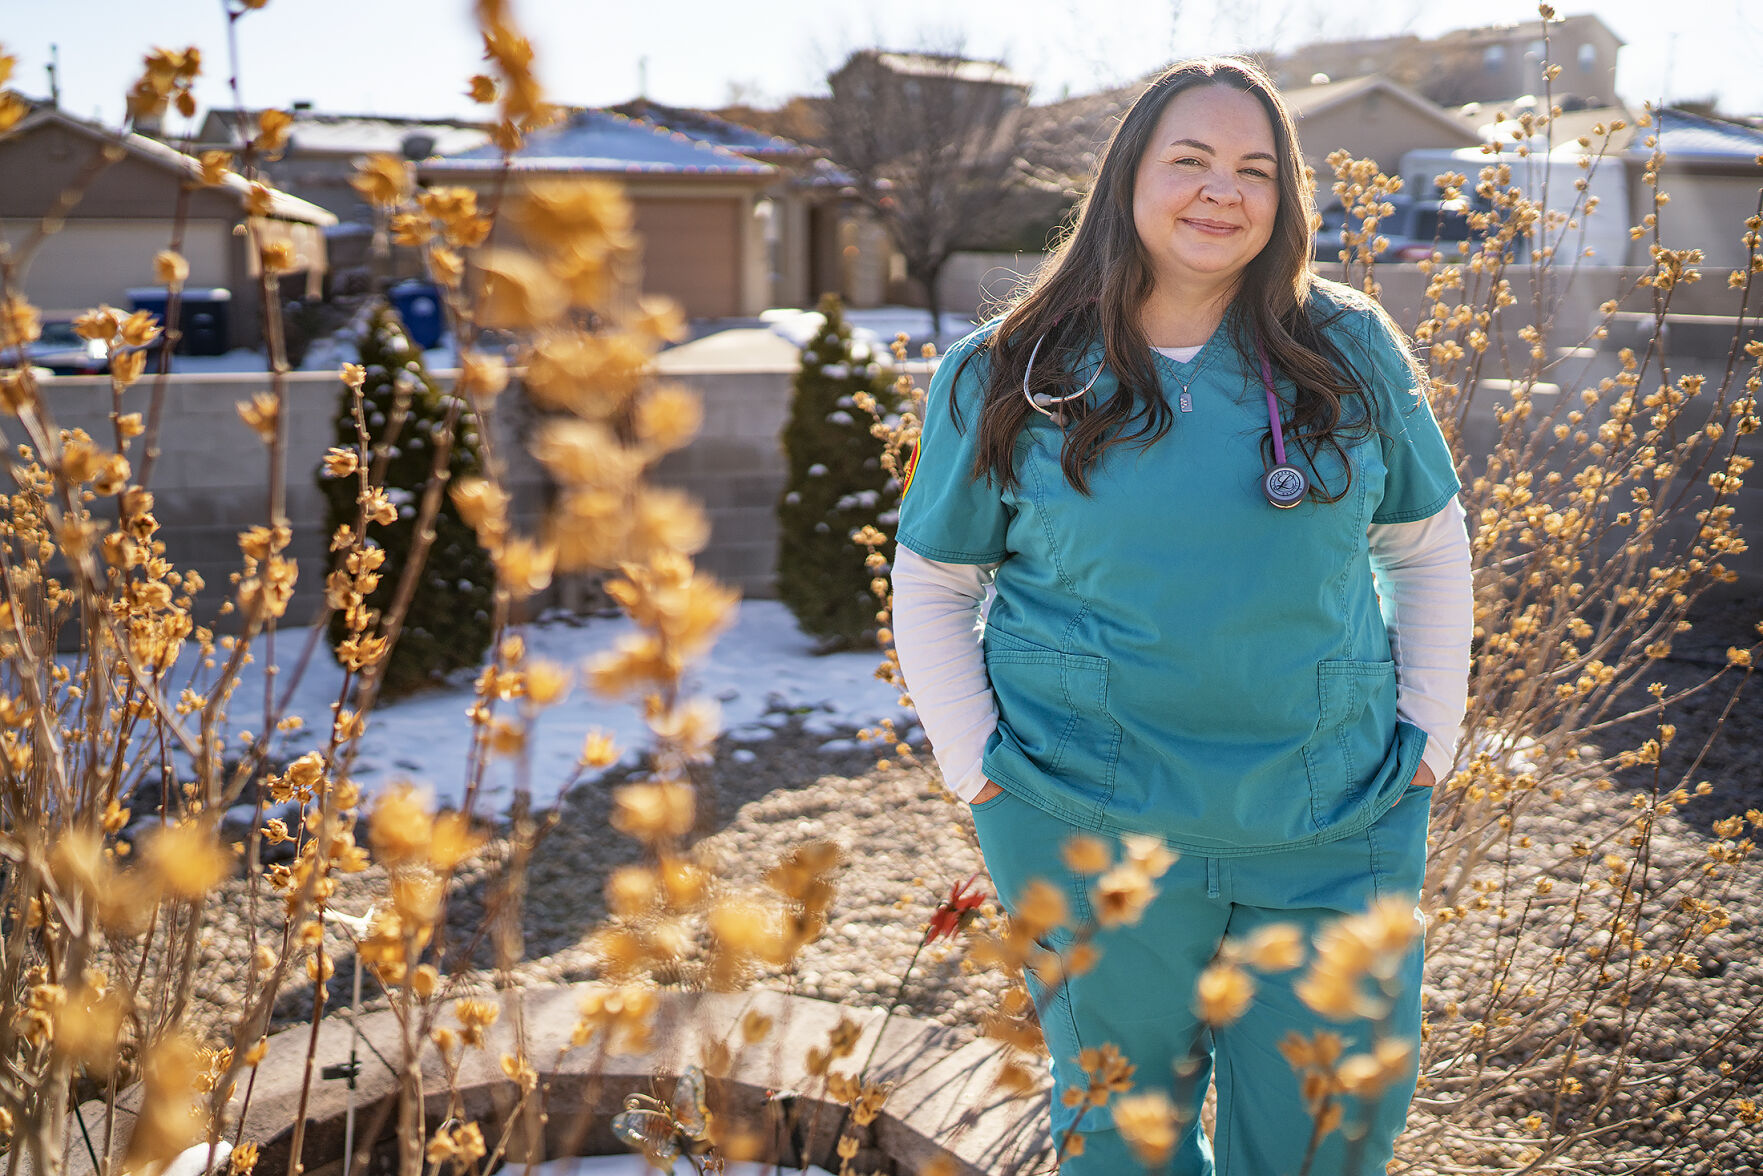 New Mexico grapples with health care staffing shortage